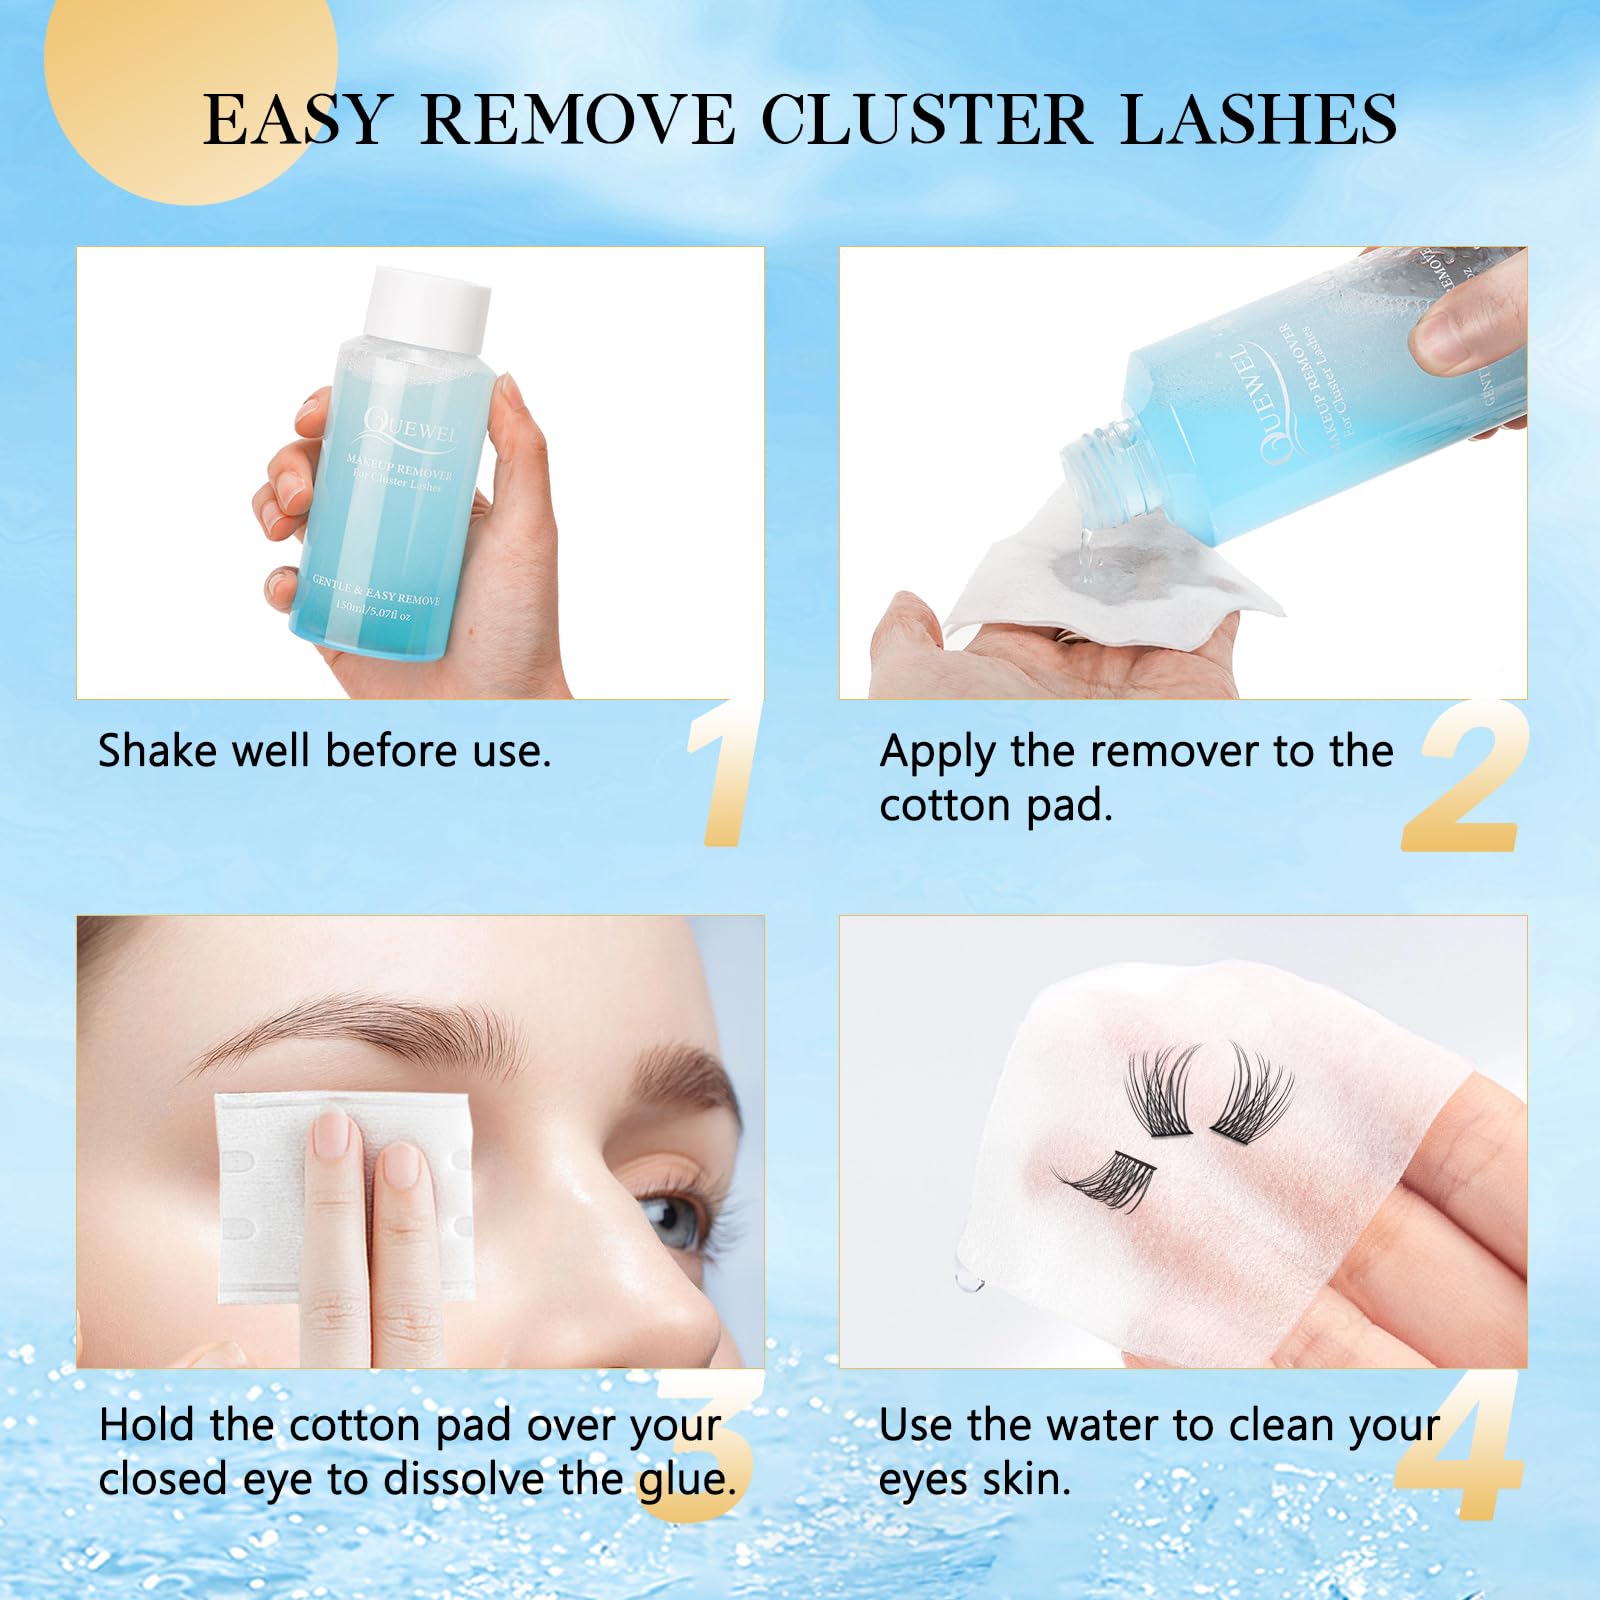 Lash Clusters Glue Remover 150ml Cluster Lashes Remover+QUEWEL Lash Bond and Seal, Lash Cluster Glue for DIY Eyelash Extensions